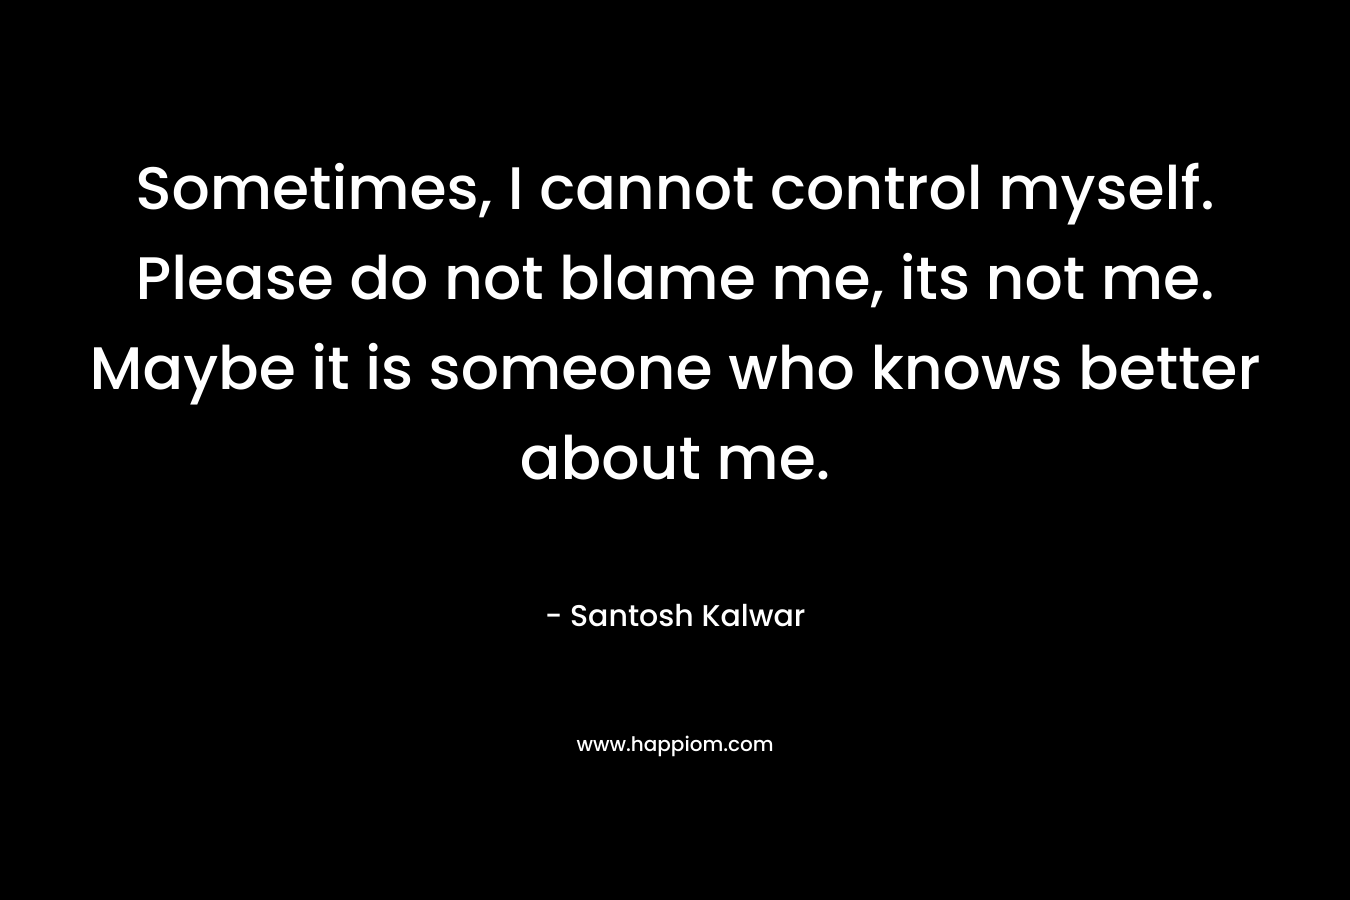 Sometimes, I cannot control myself. Please do not blame me, its not me. Maybe it is someone who knows better about me.